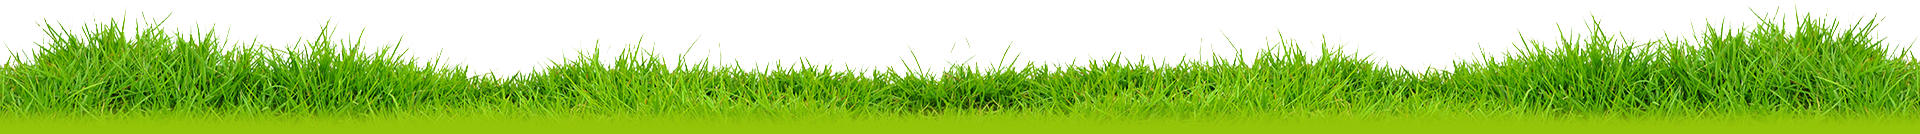 grass-png-image-pictures-images-grass-png-image-13.png